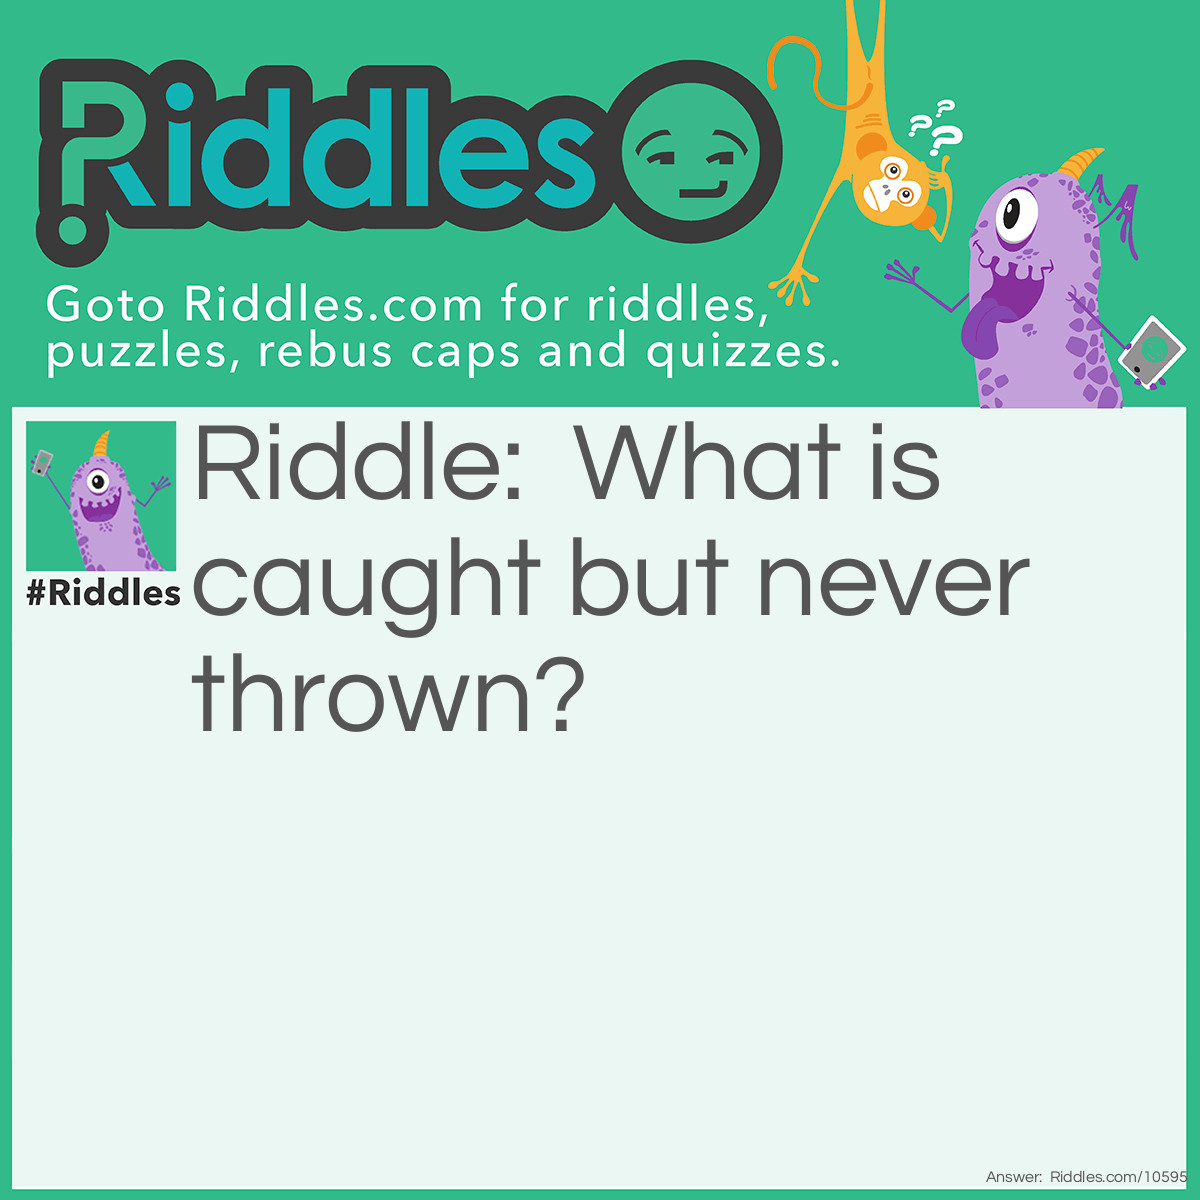 Riddle: What is caught but never thrown? Answer: A cold